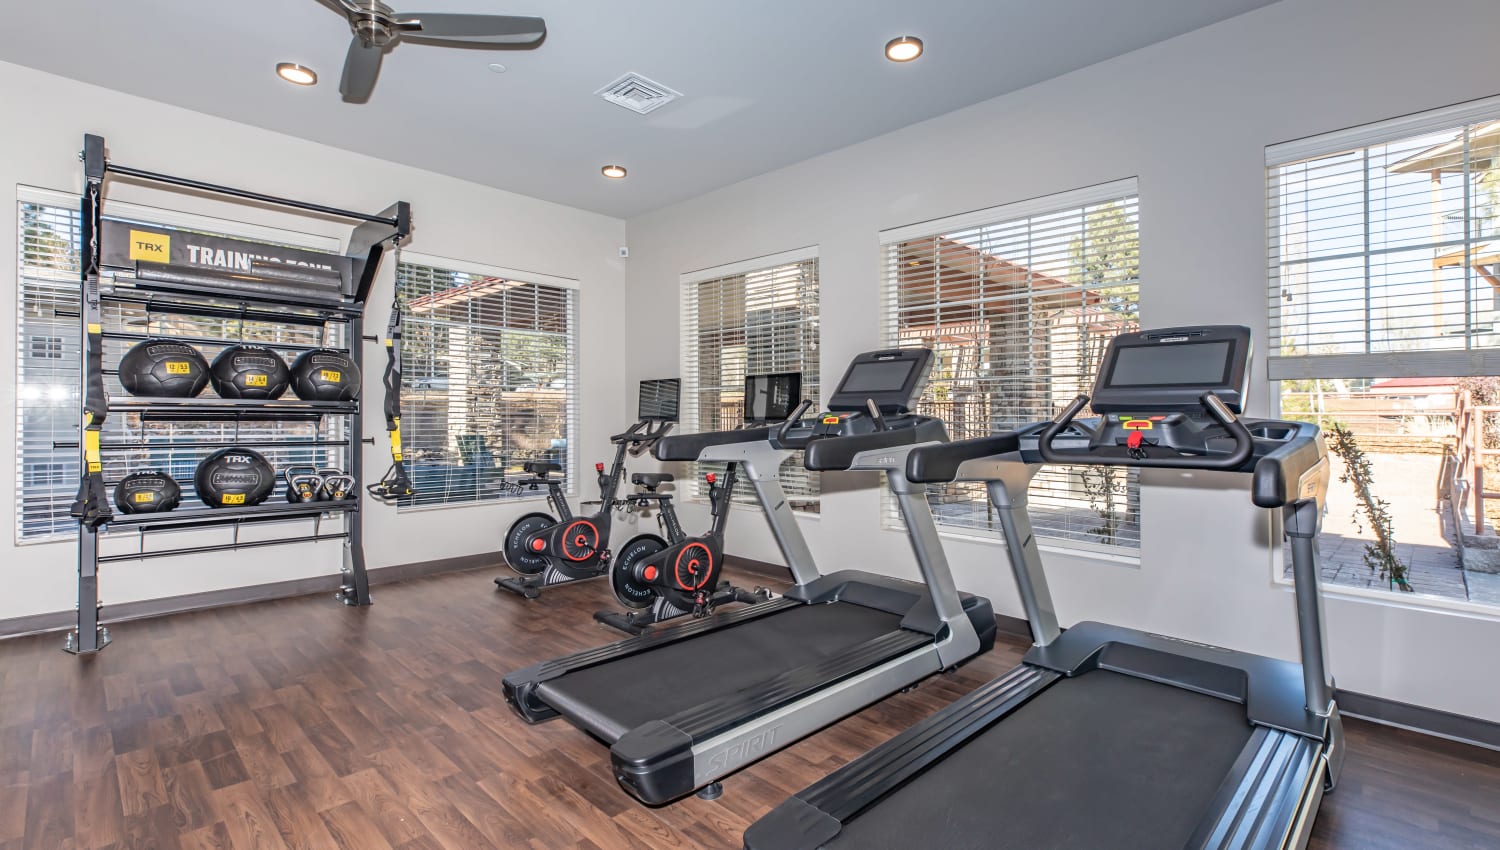 Treadmills in the fitness center at Trailside Apartments in Flagstaff, Arizona